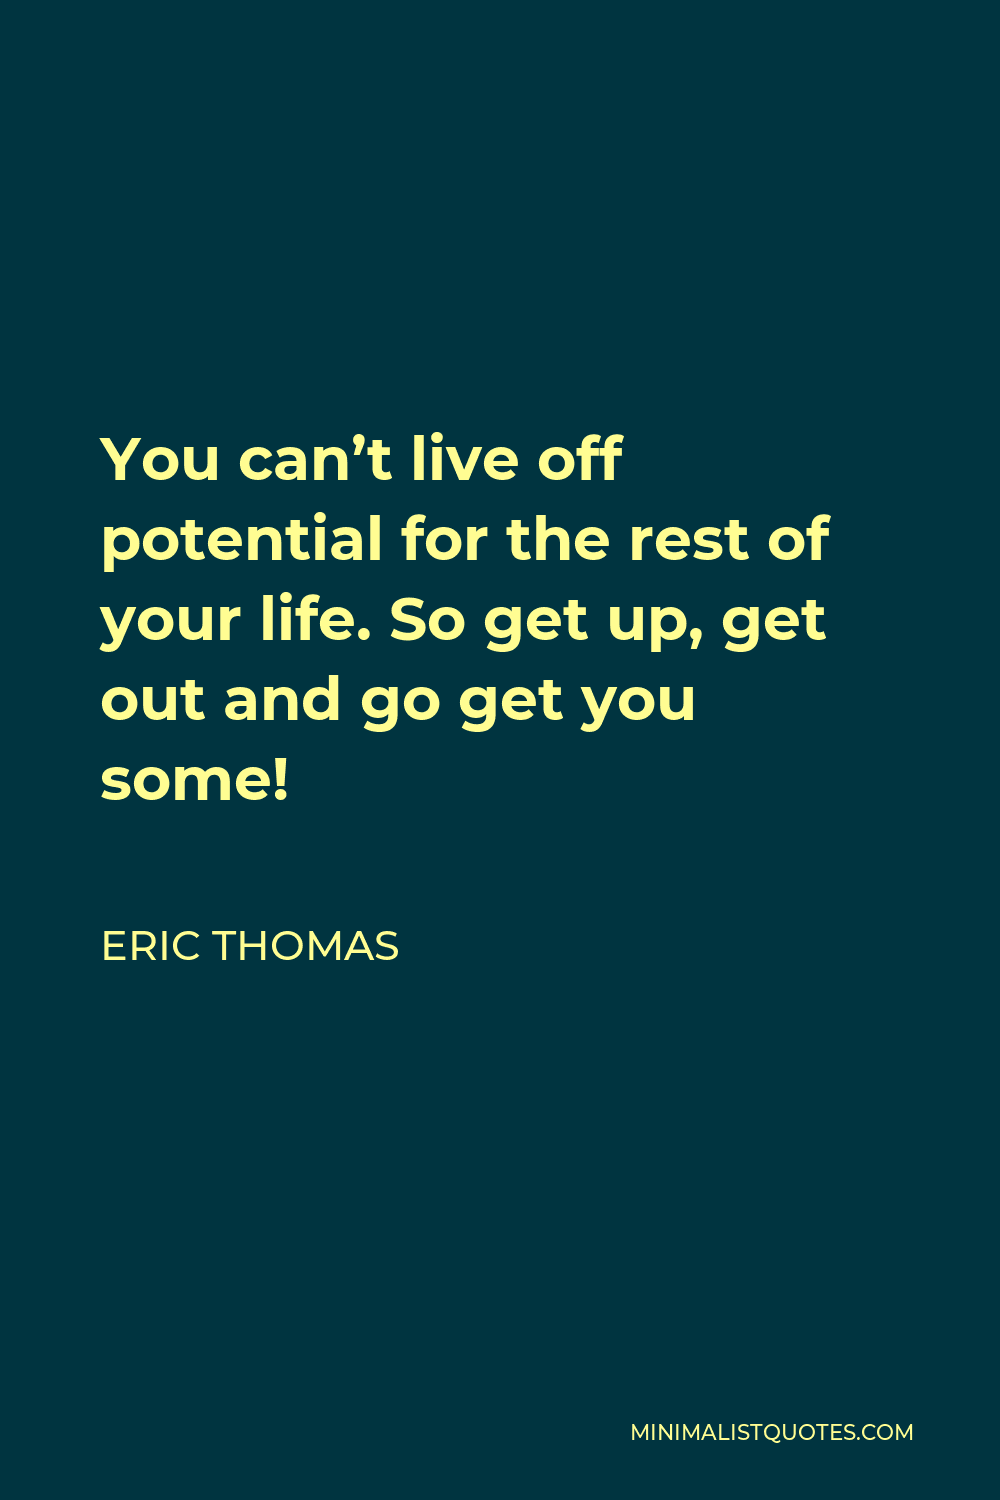 Eric Thomas Quote - You can’t live off potential for the rest of your life. So get up, get out and go get you some!